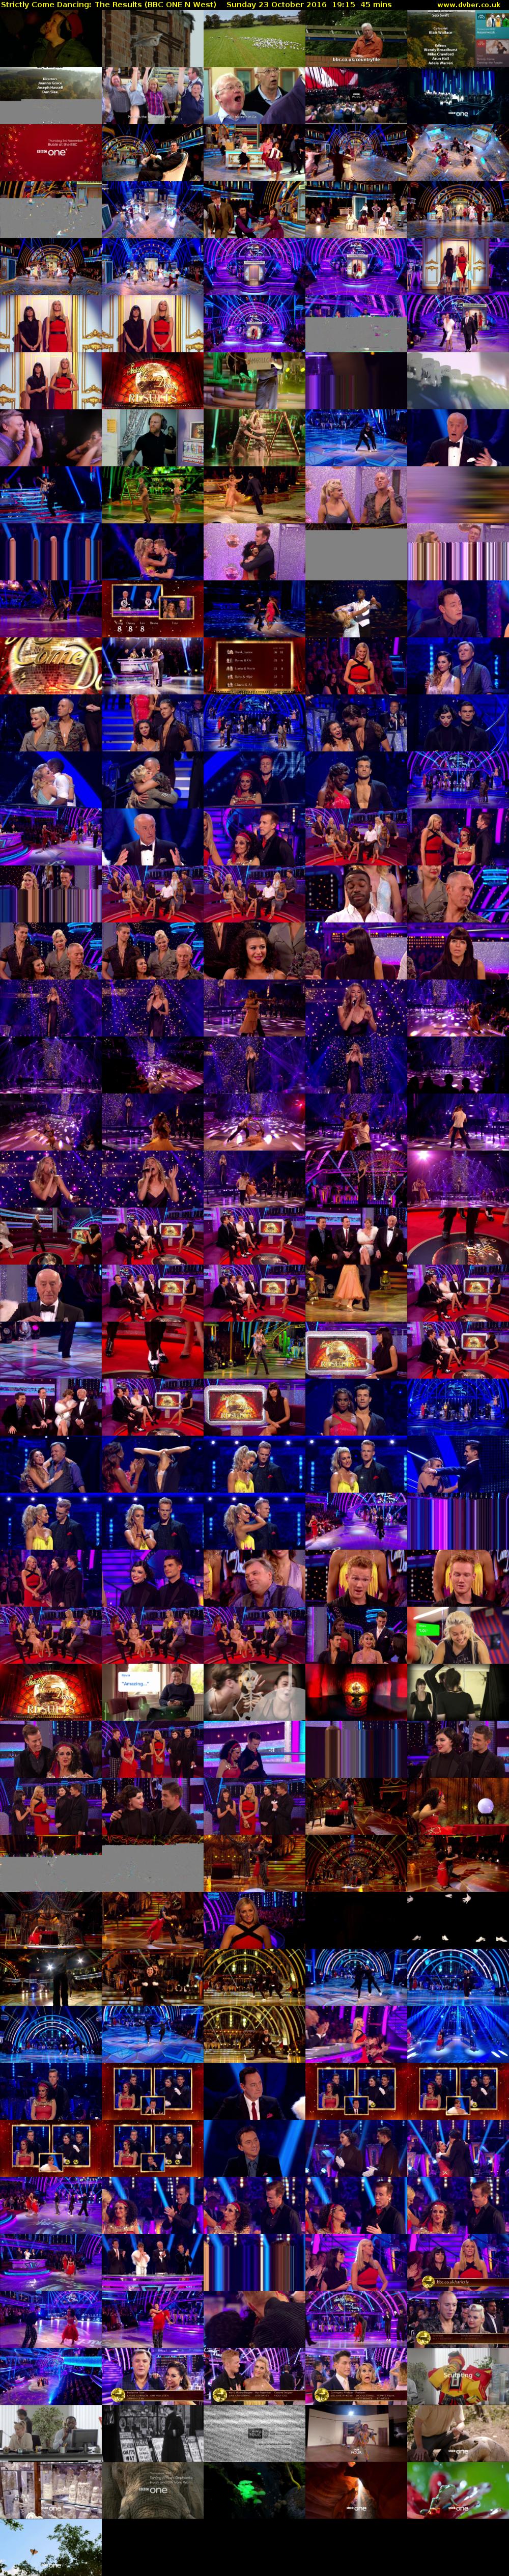 Strictly Come Dancing: The Results (BBC ONE N West) Sunday 23 October 2016 19:15 - 20:00